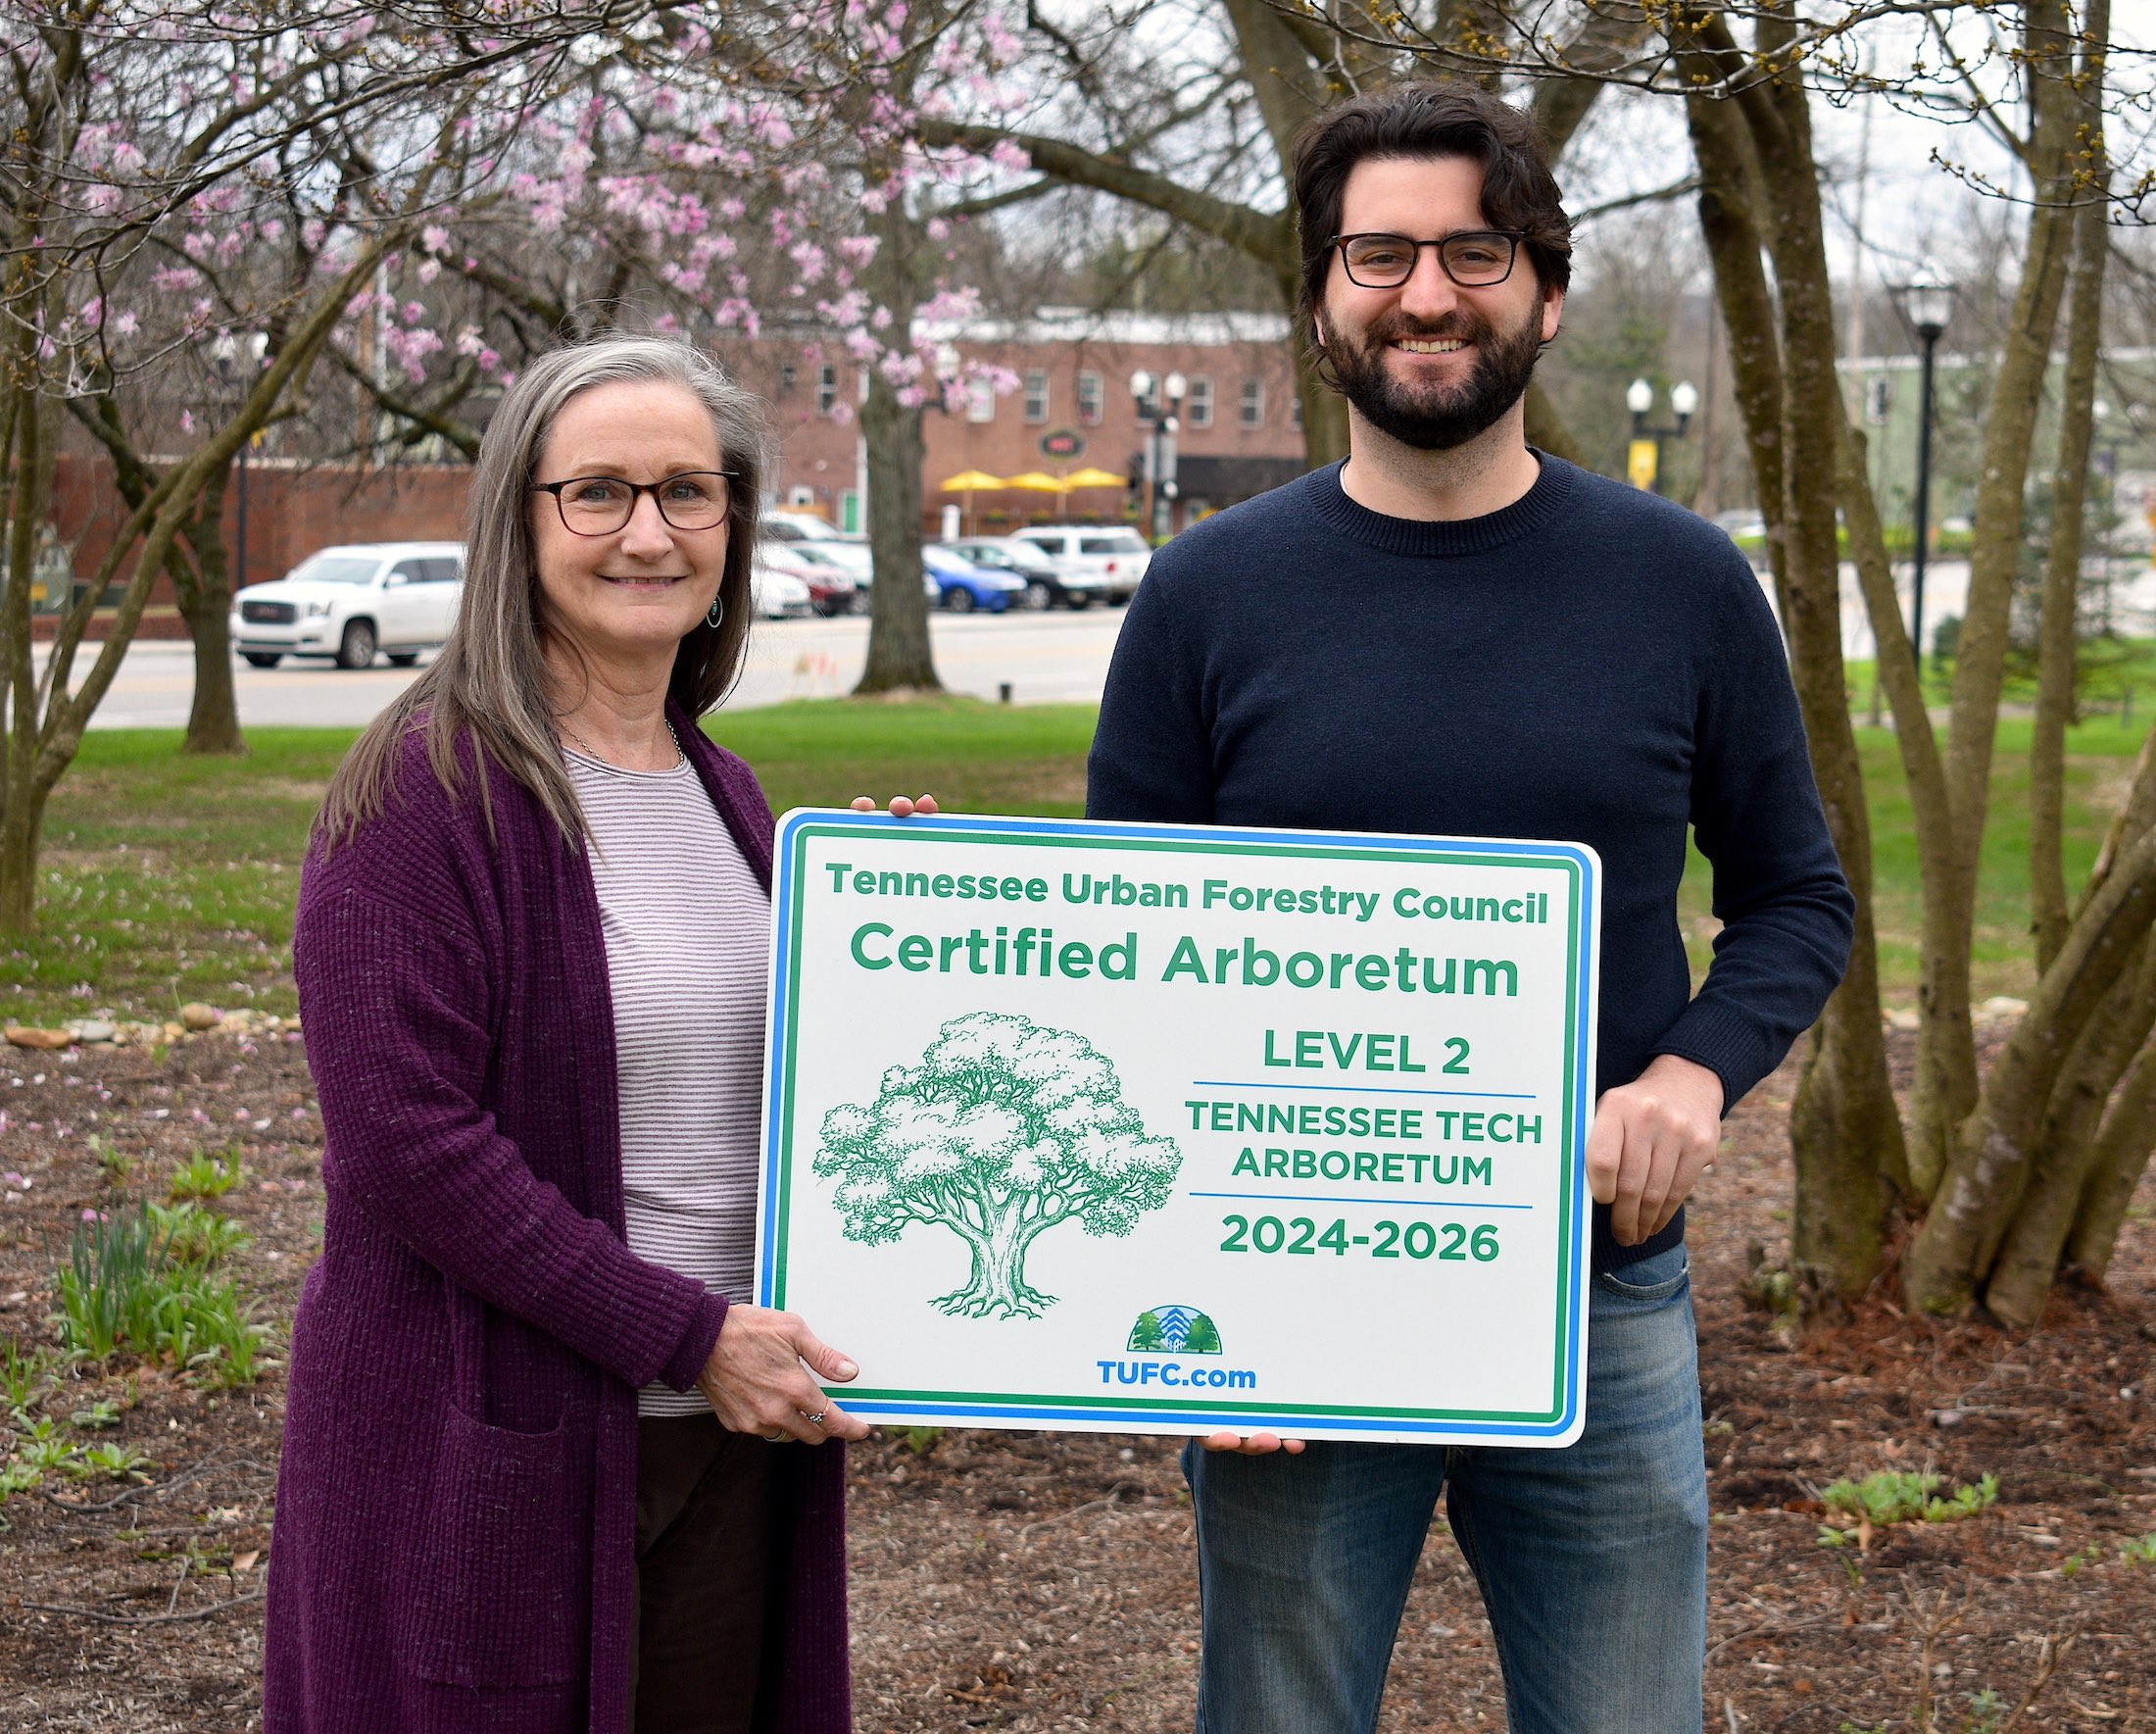 From left: Delayne Miller, sustainability manager at Tech, is presented with the university’s official arboretum certification by Kevin Bolger, council operations and program coordinator for the Tennessee Urban Forestry Council. 